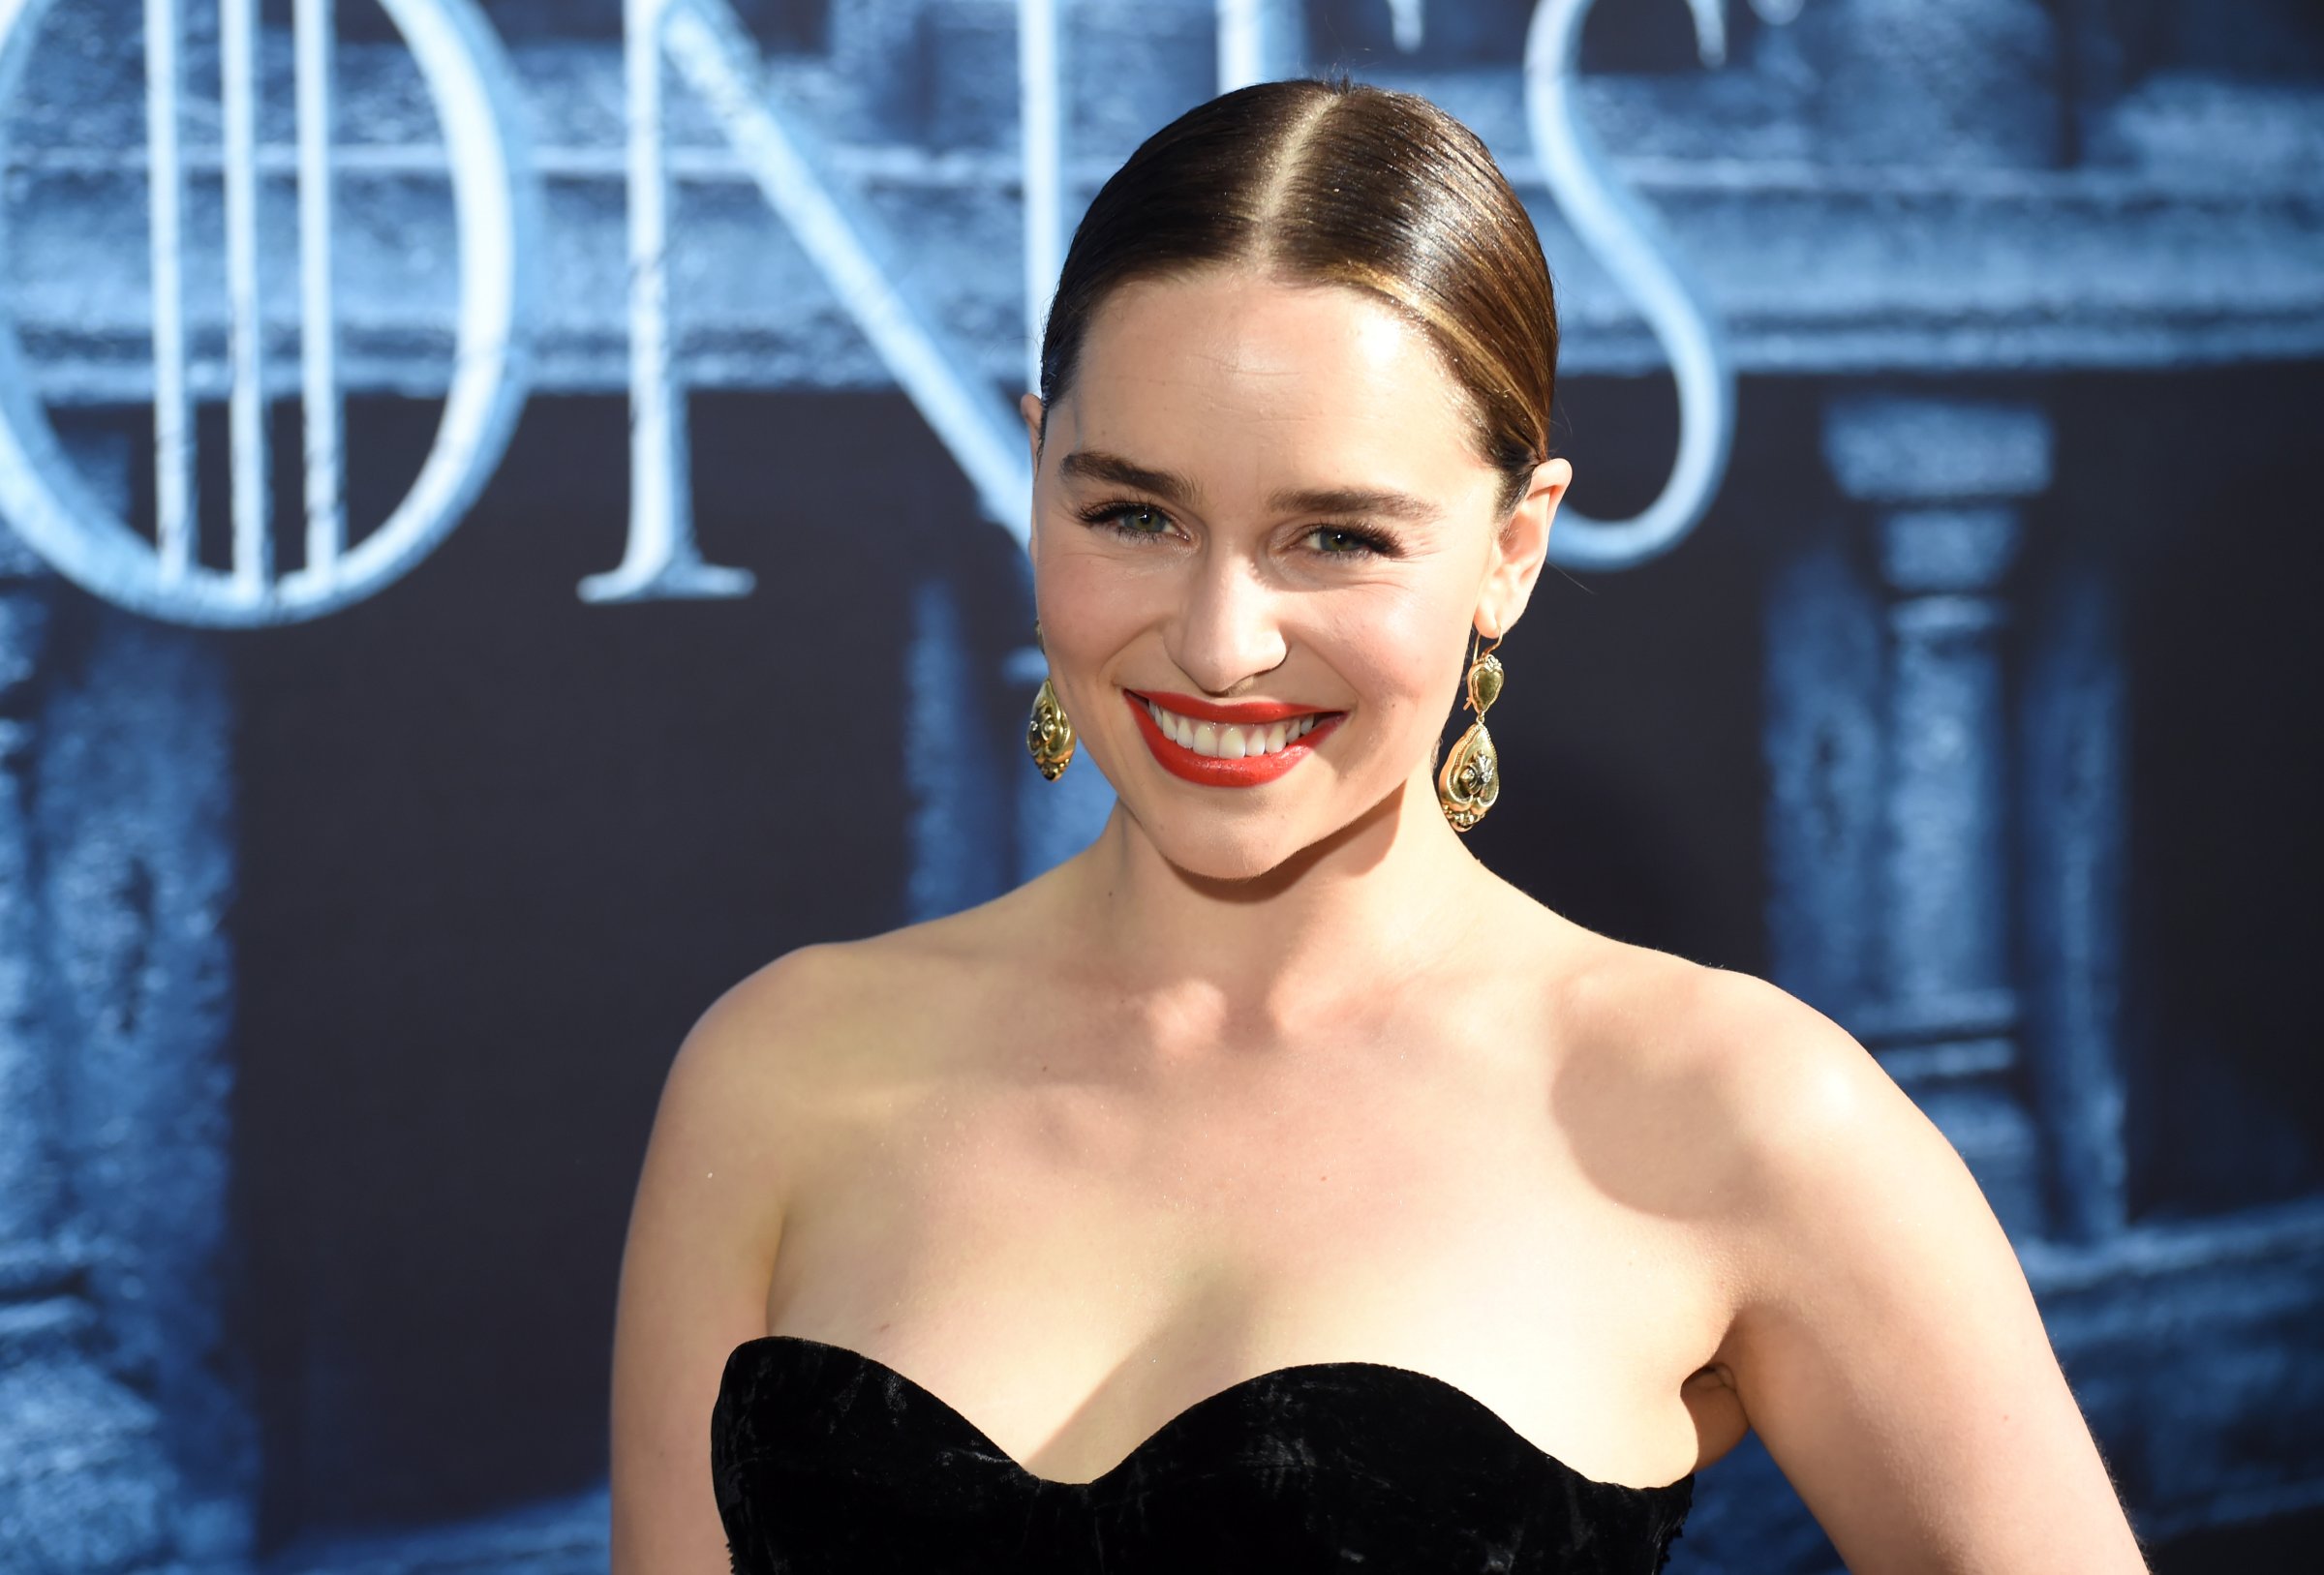 Actress Emilia Clarke attends the premiere for the sixth season of HBO's "Game Of Thrones" at TCL Chinese Theatre on April 10, 2016 in Hollywood City.